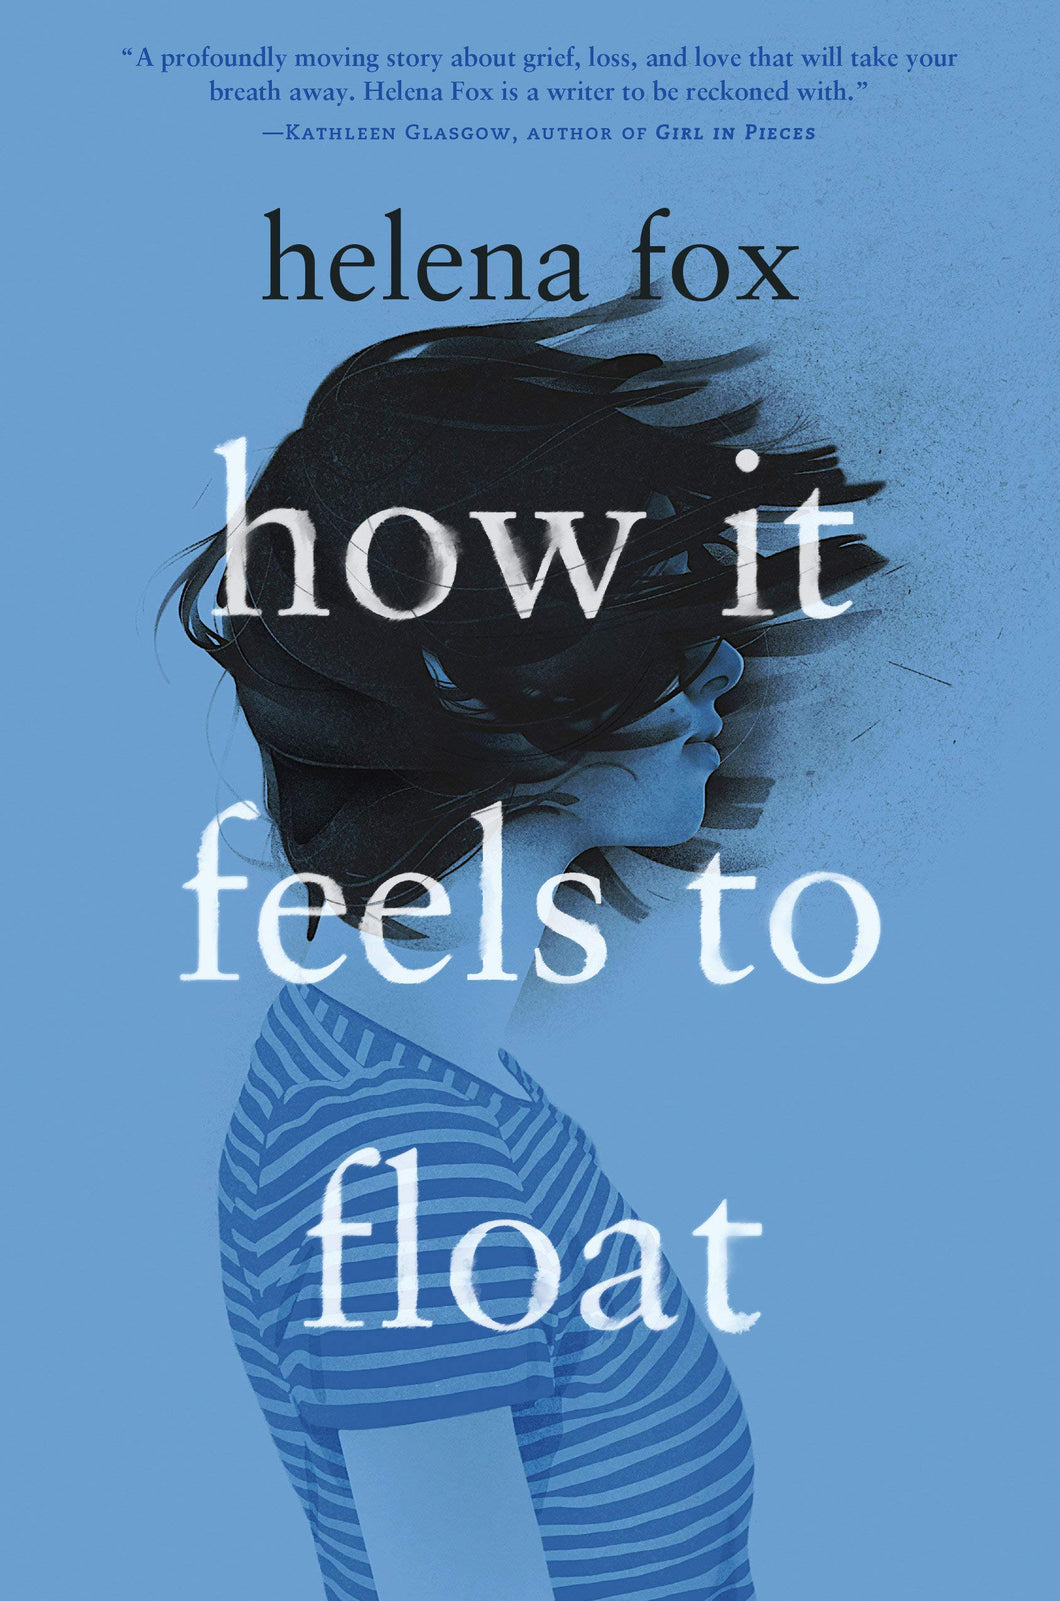 How It Feels To Float by Mary Helena Fox / Hardcover or Paperback - NEW BOOK